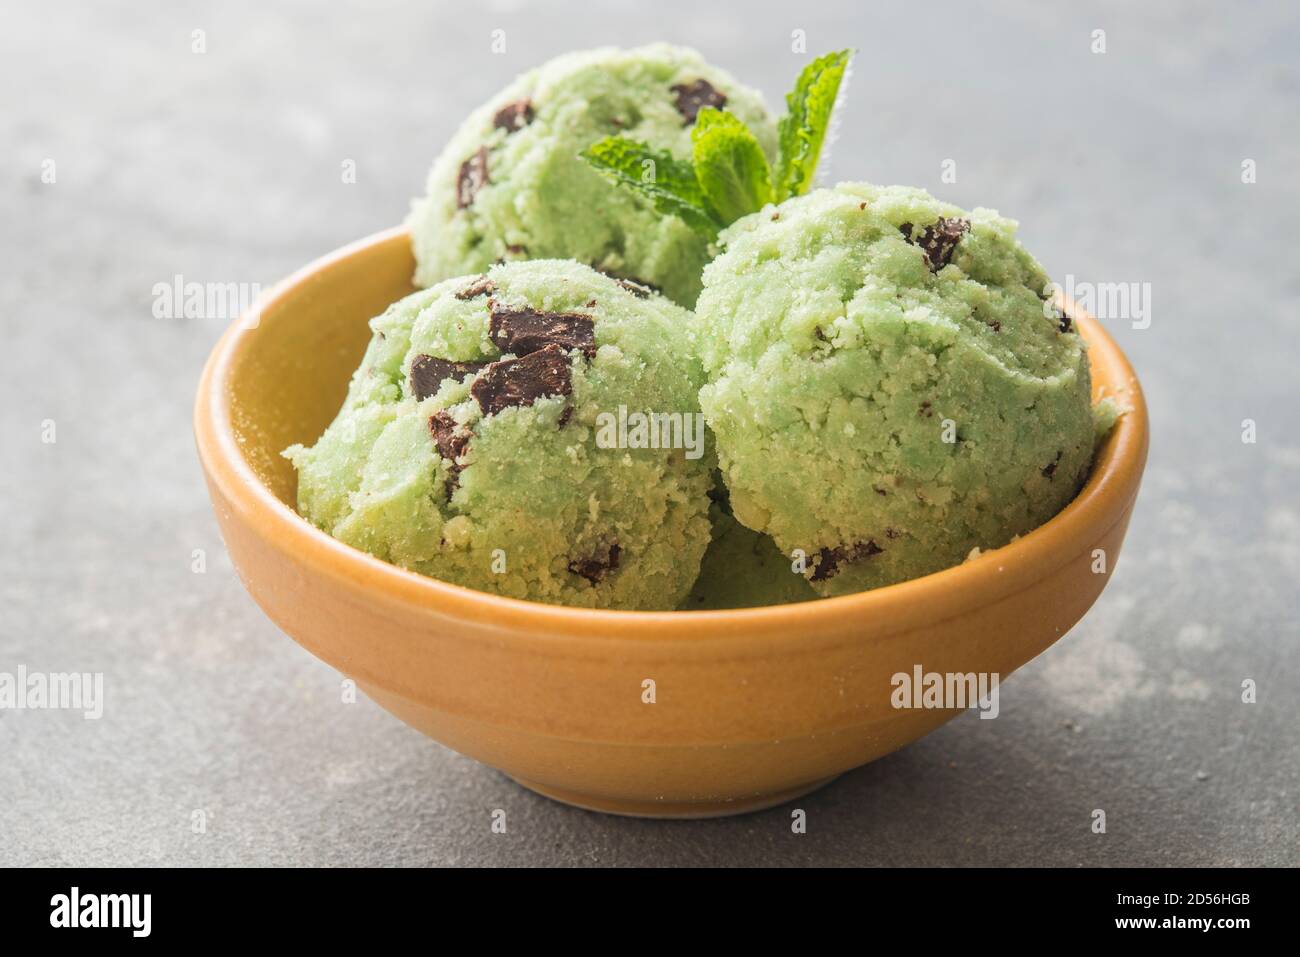 Ice cream with mint and chocolate chip Stock Photo